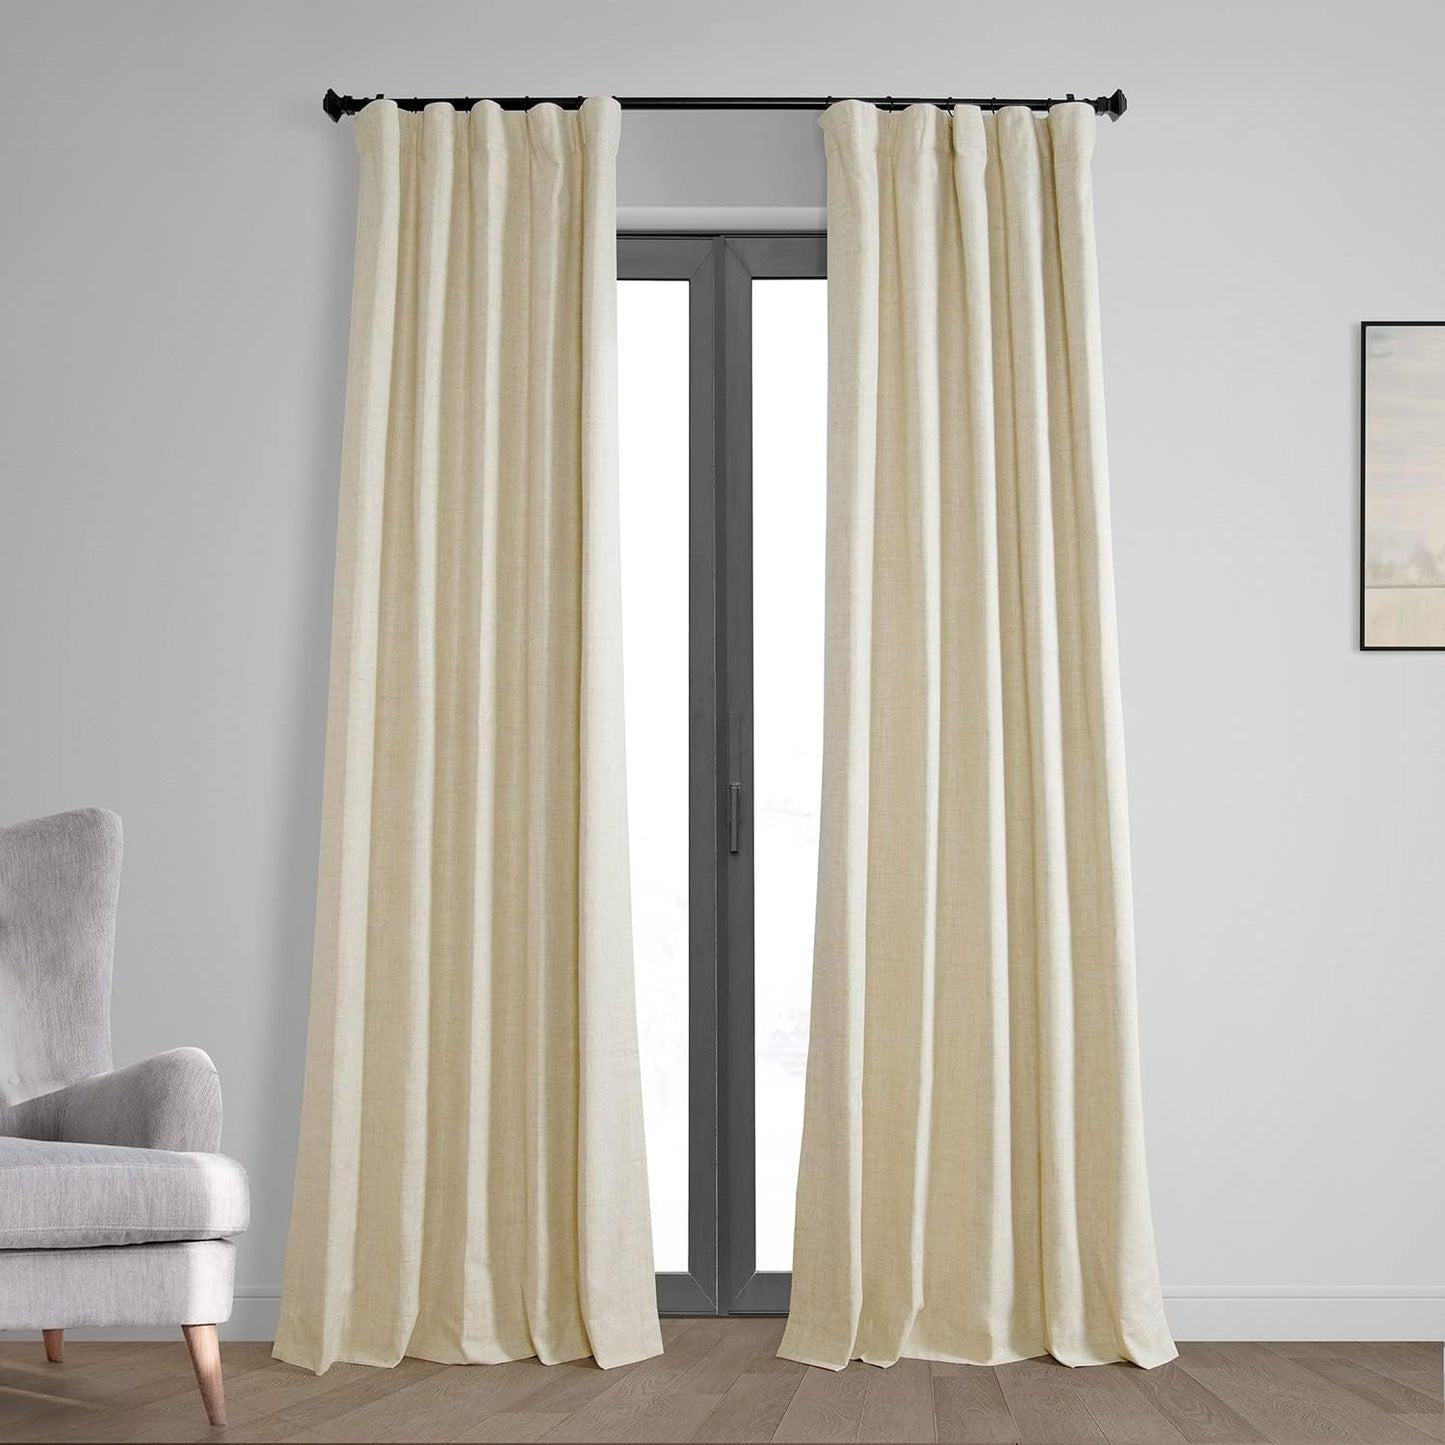 HPD Half Price Drapes Vintage Blackout Curtains for Bedroom - 96 Inches Long Thermal Cross Linen Weave Full Light Blocking 1 Panel Blackout Curtain, (50W X 96L), Millennial Grey  Exclusive Fabrics & Furnishings Natural Light Beige 50W X 108L 